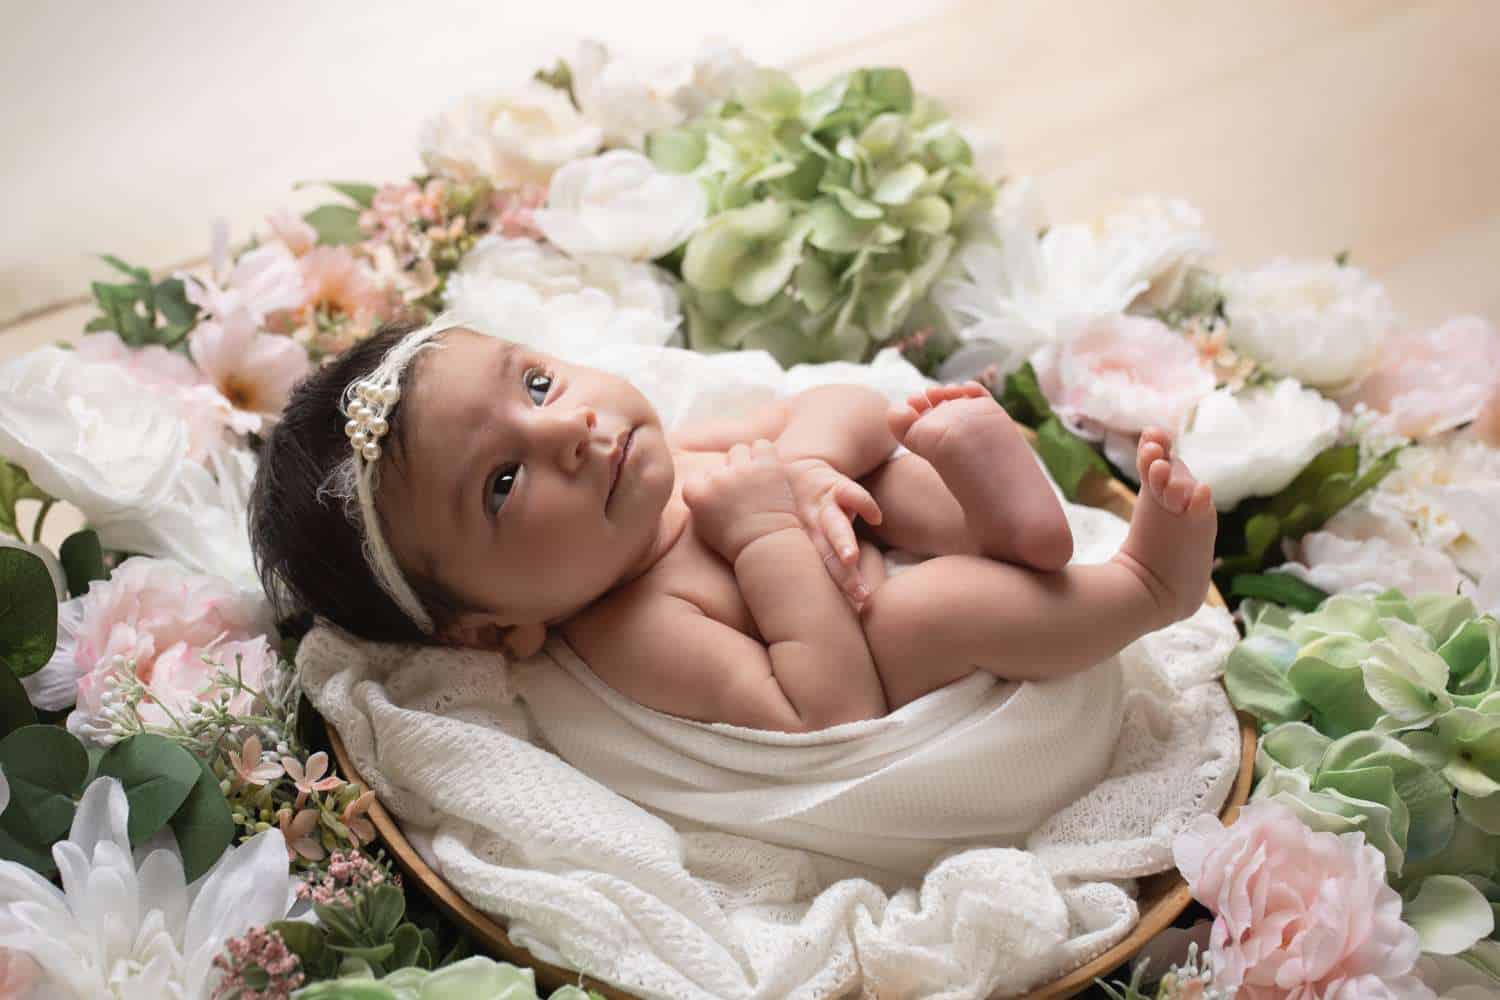 newborn photographer in rochester ny captures newborn baby girl in a spring floral wreath